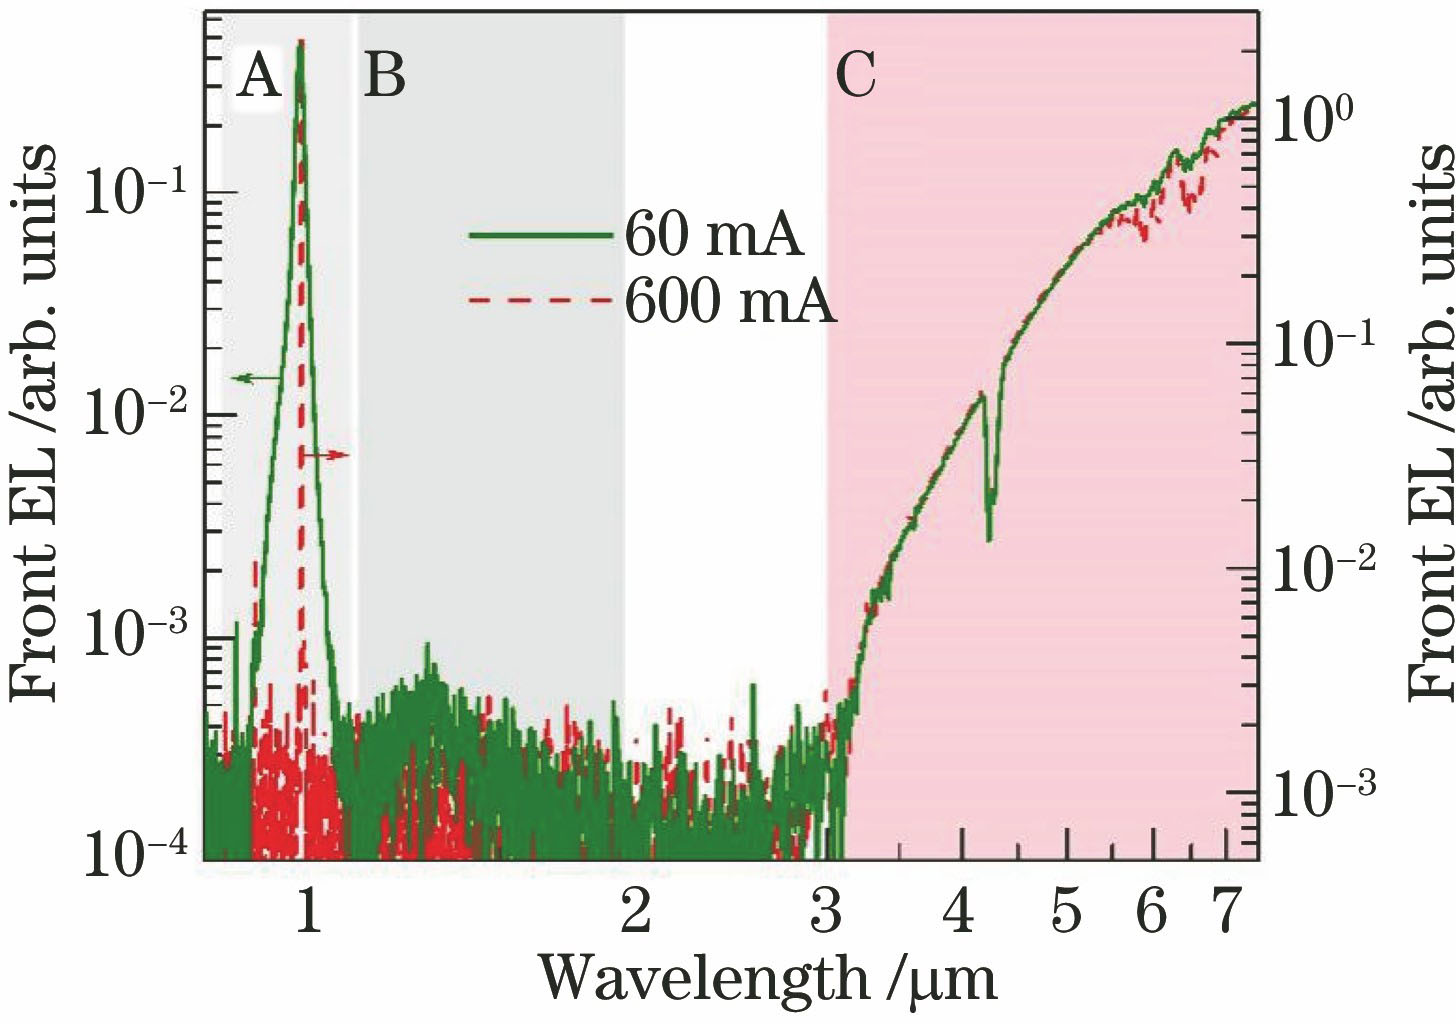 EL spectra from front facet of HPLD based on asymmetric InGaAs/AlGaAs single quantum well structure at different steady-state injection currents